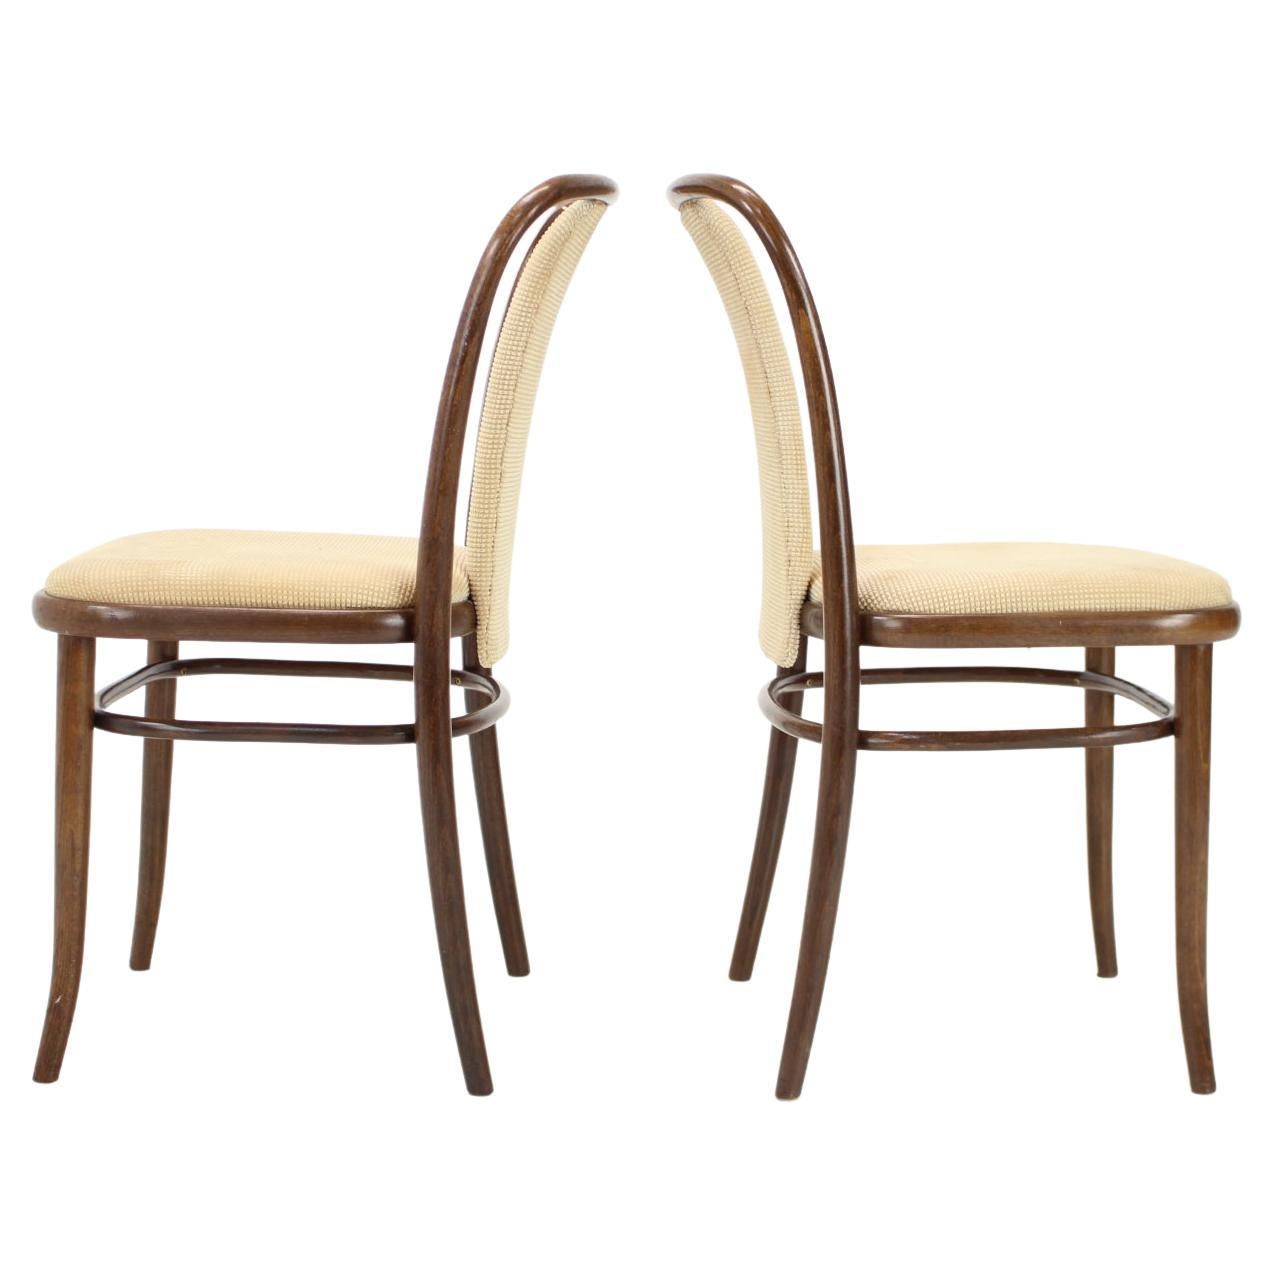 Set of Two Bentwood Chairs, Ton, 1980s